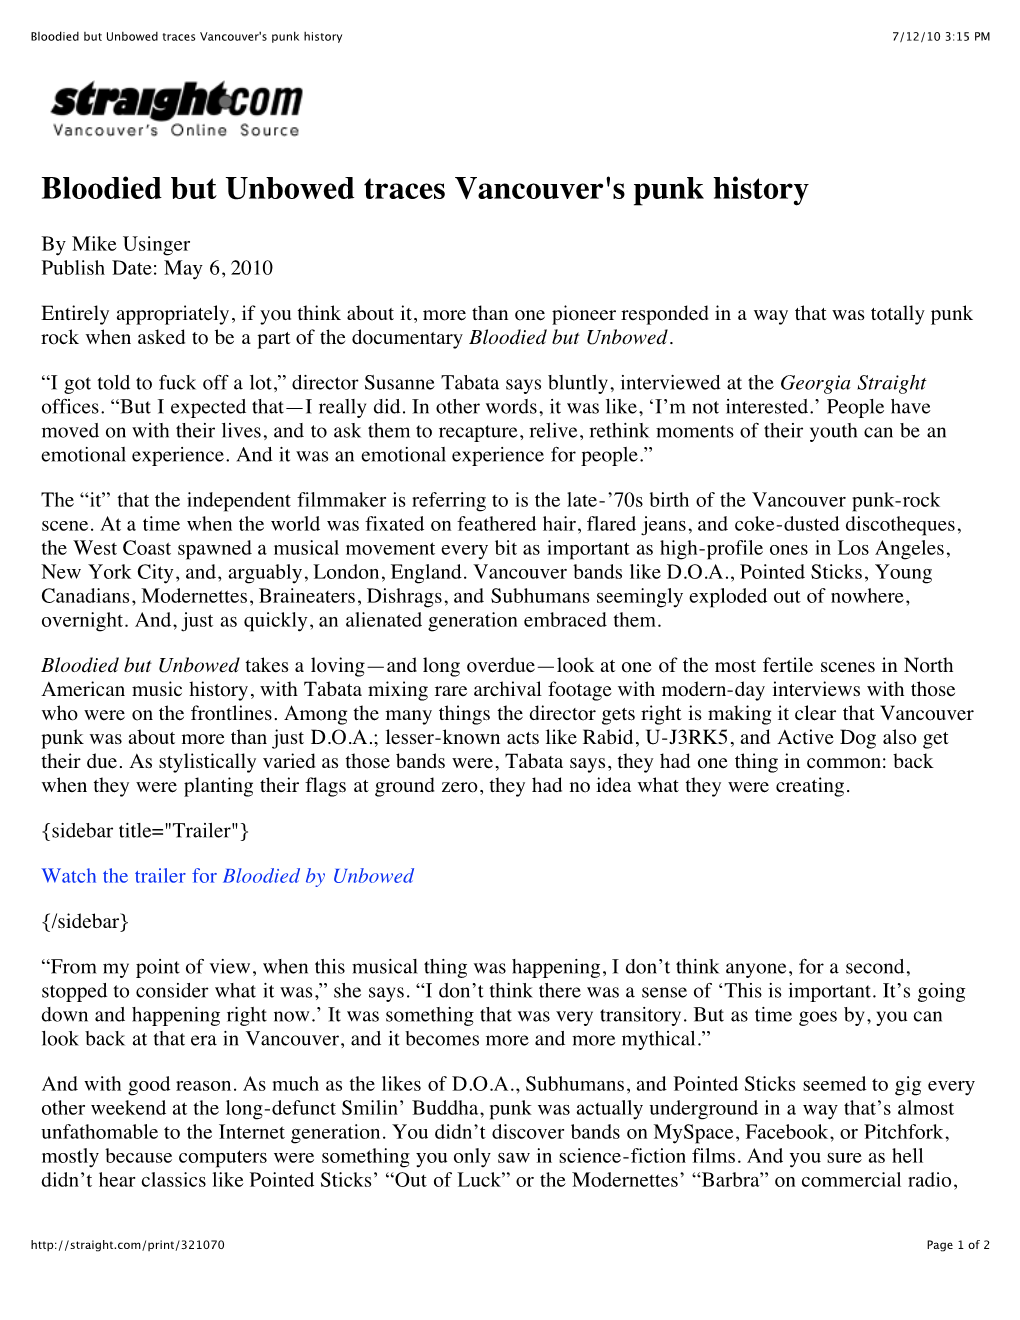 Bloodied but Unbowed Traces Vancouver's Punk History 7/12/10 3:15 PM